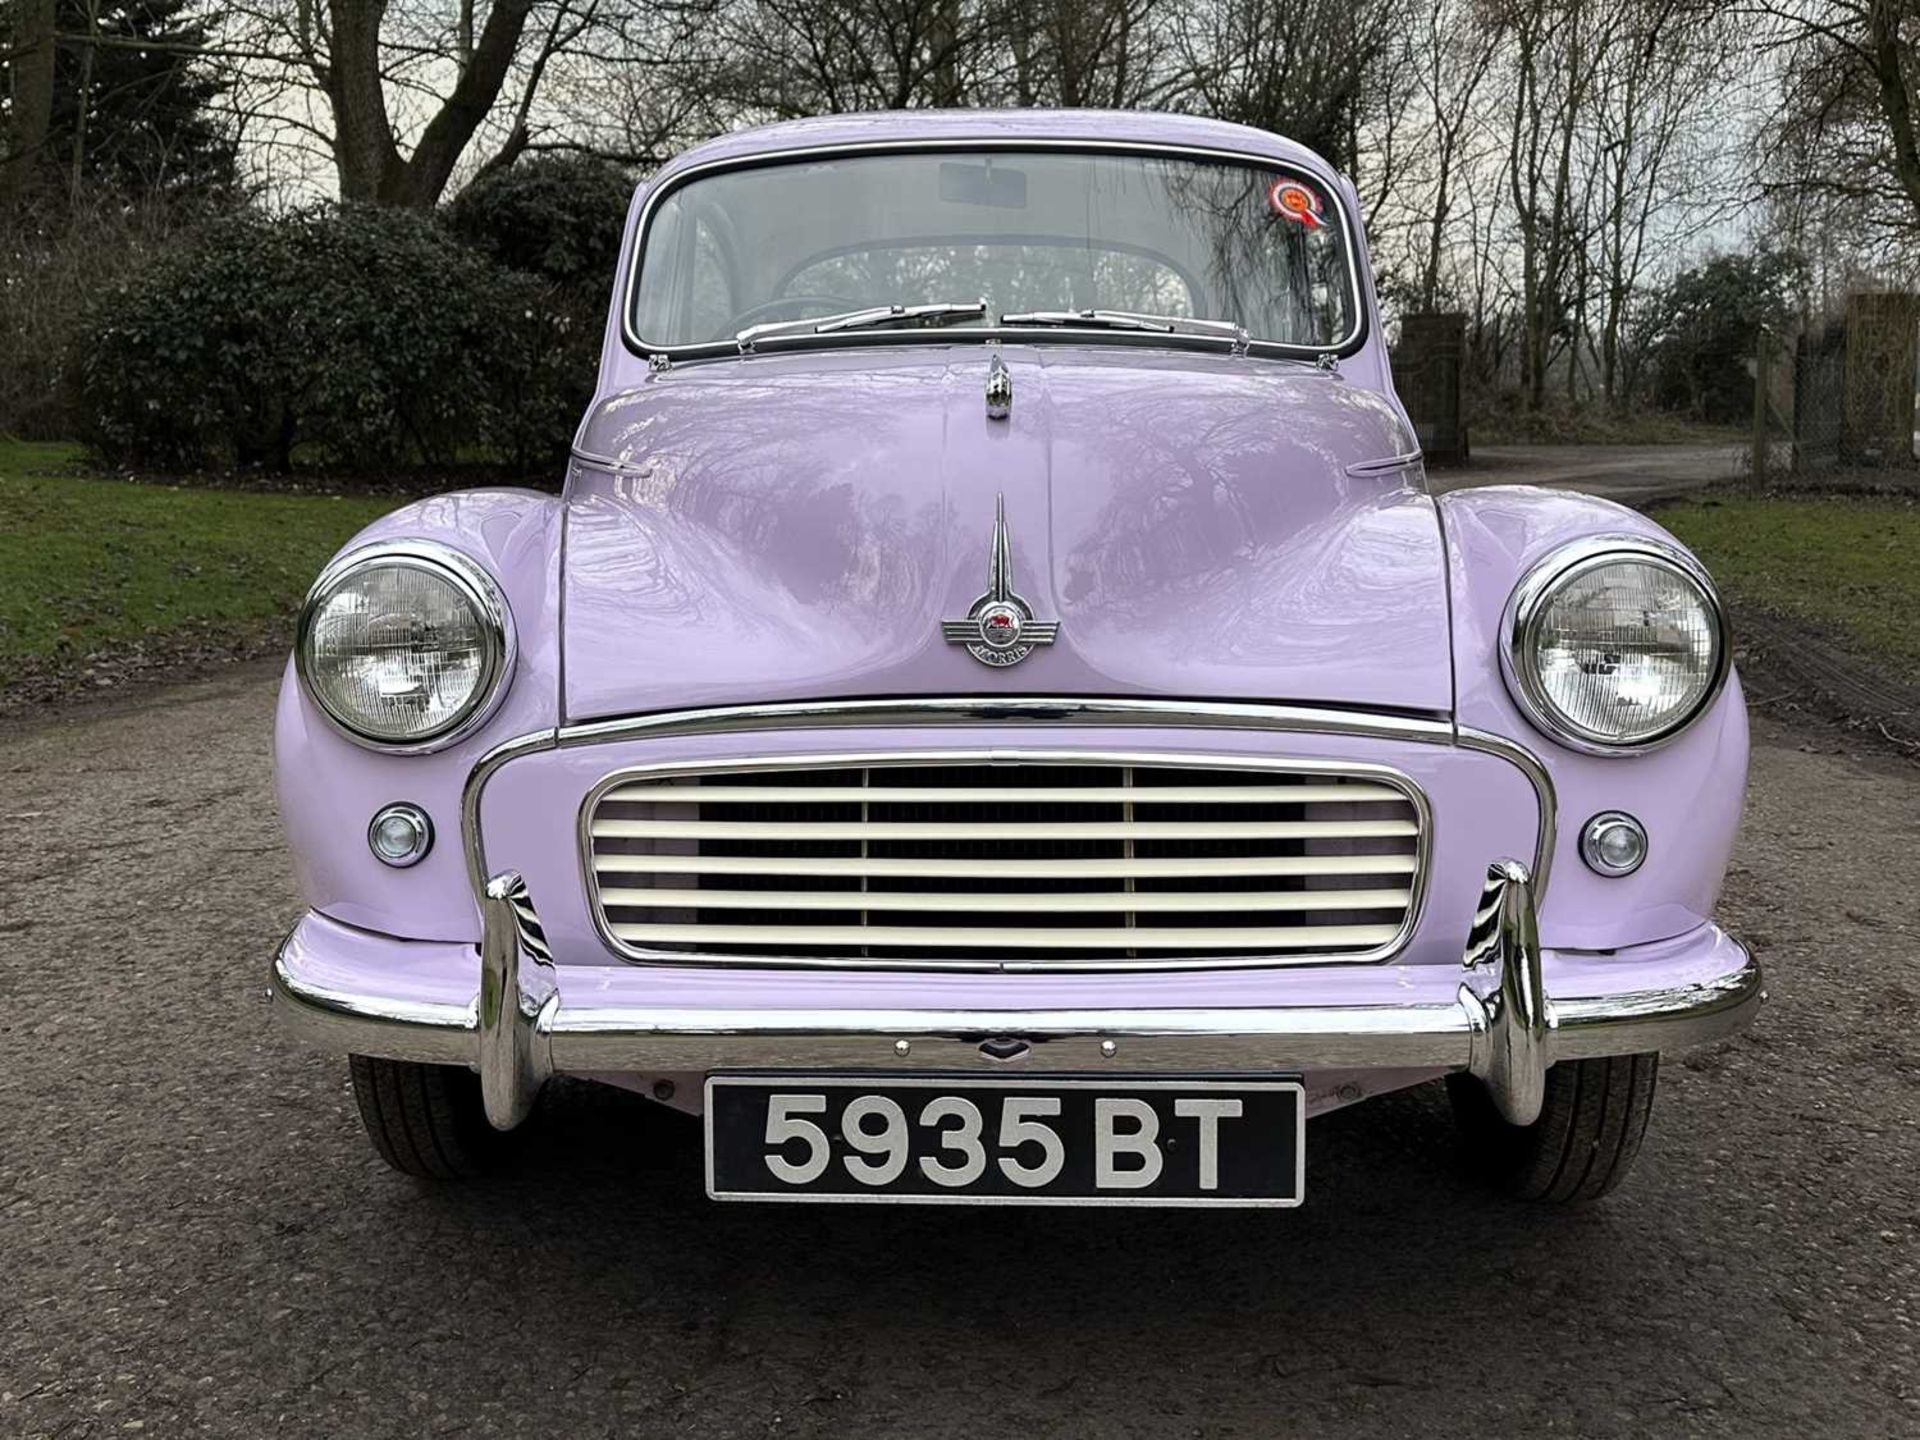 1961 Morris Minor Million 179 of 350 built, fully restored, only three owners from new - Image 14 of 100